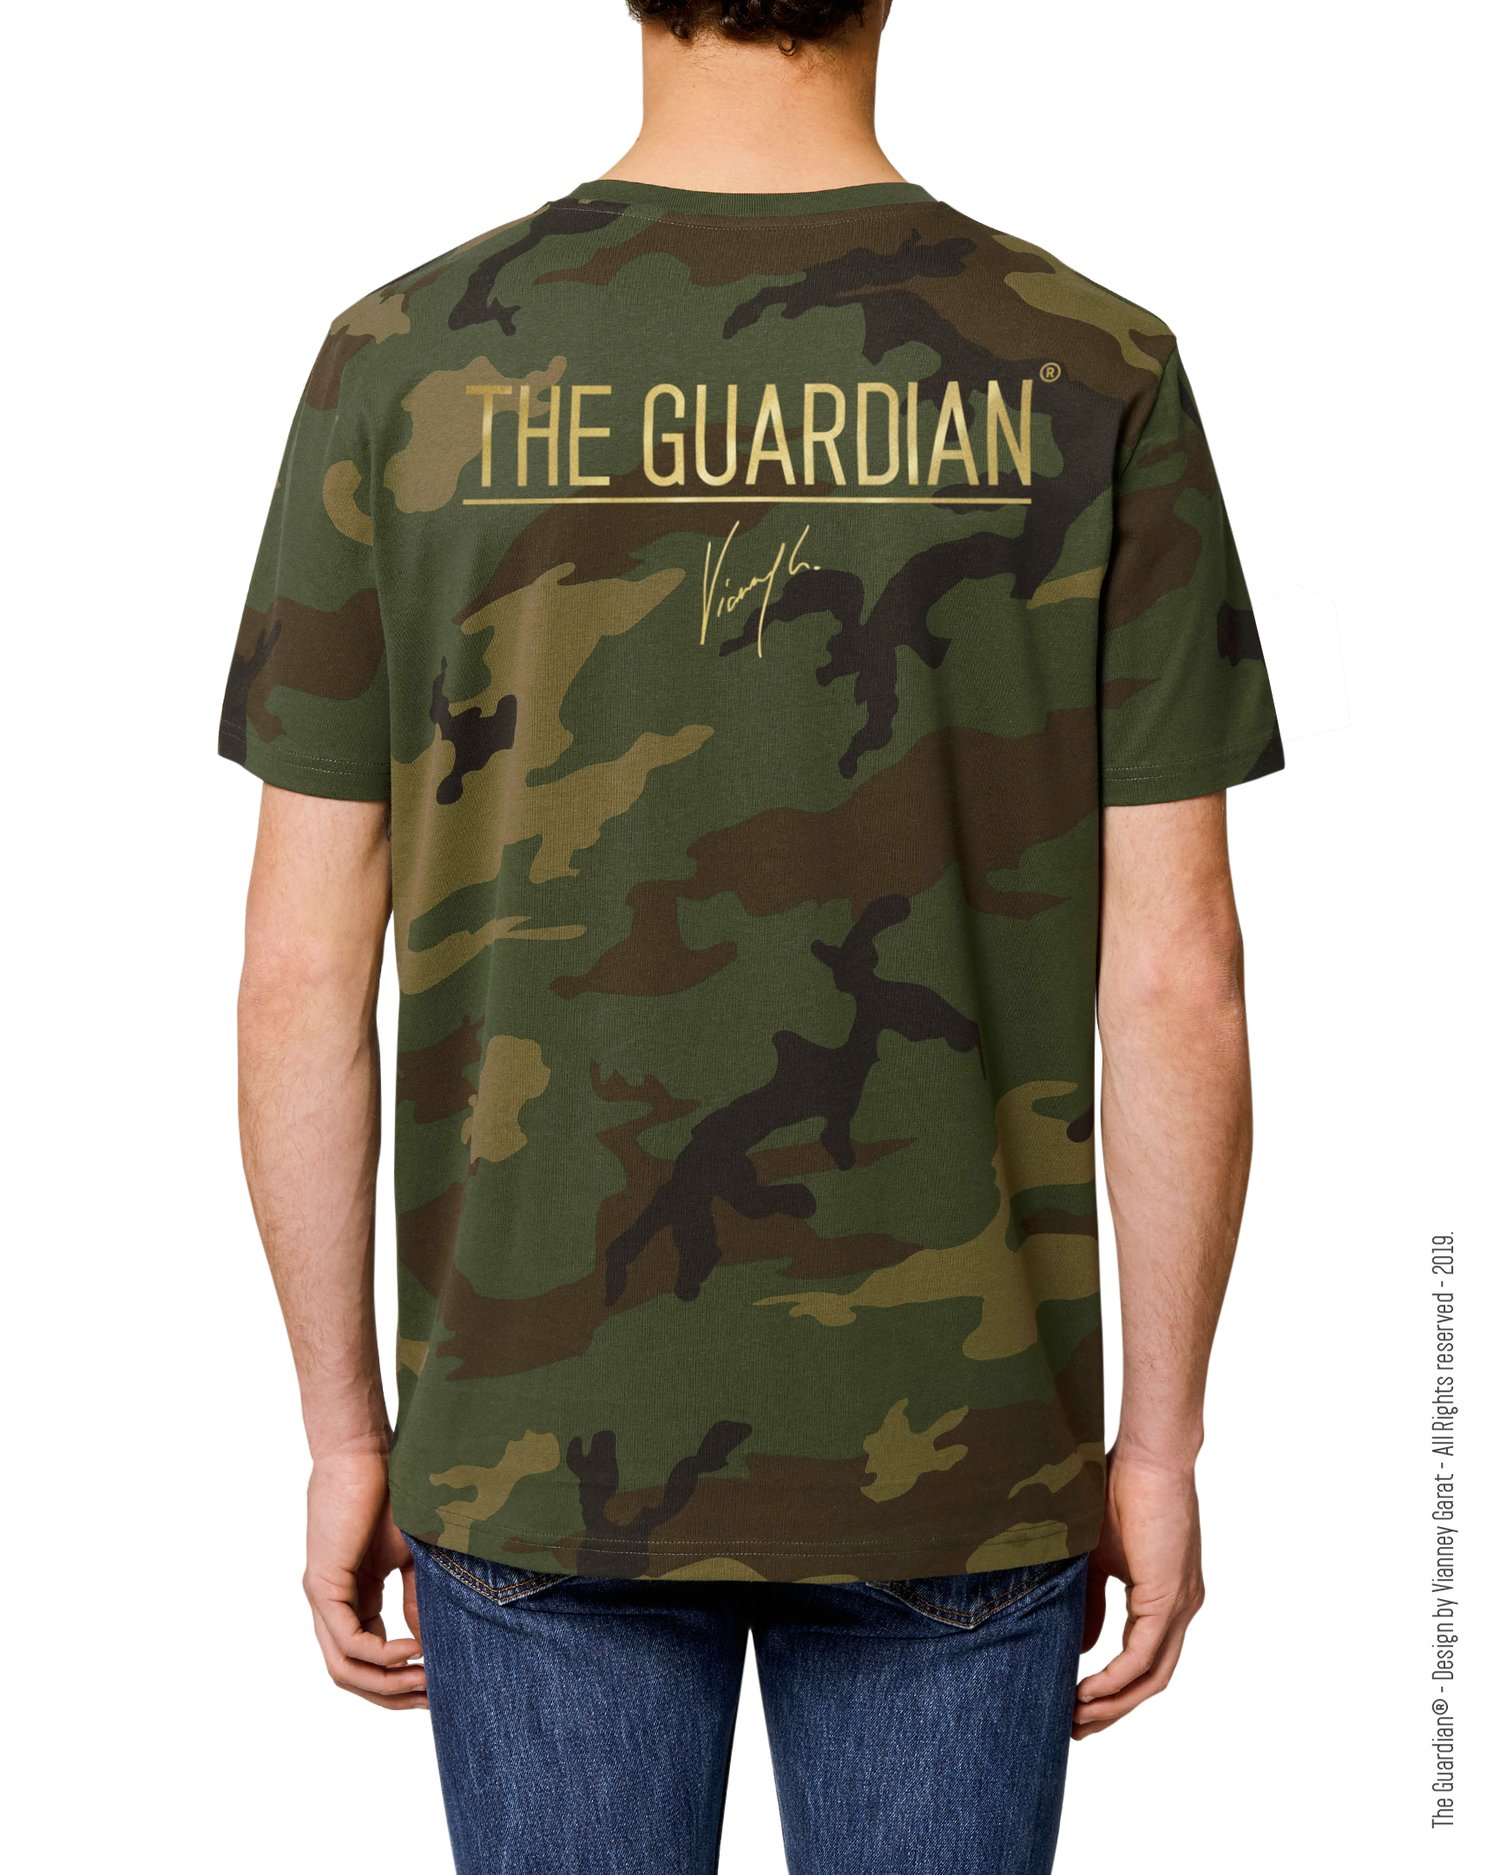 Image of T-SHIRT THE GUARDIAN® - DREAM FIGHTER EDITION - Extra Limited Edition